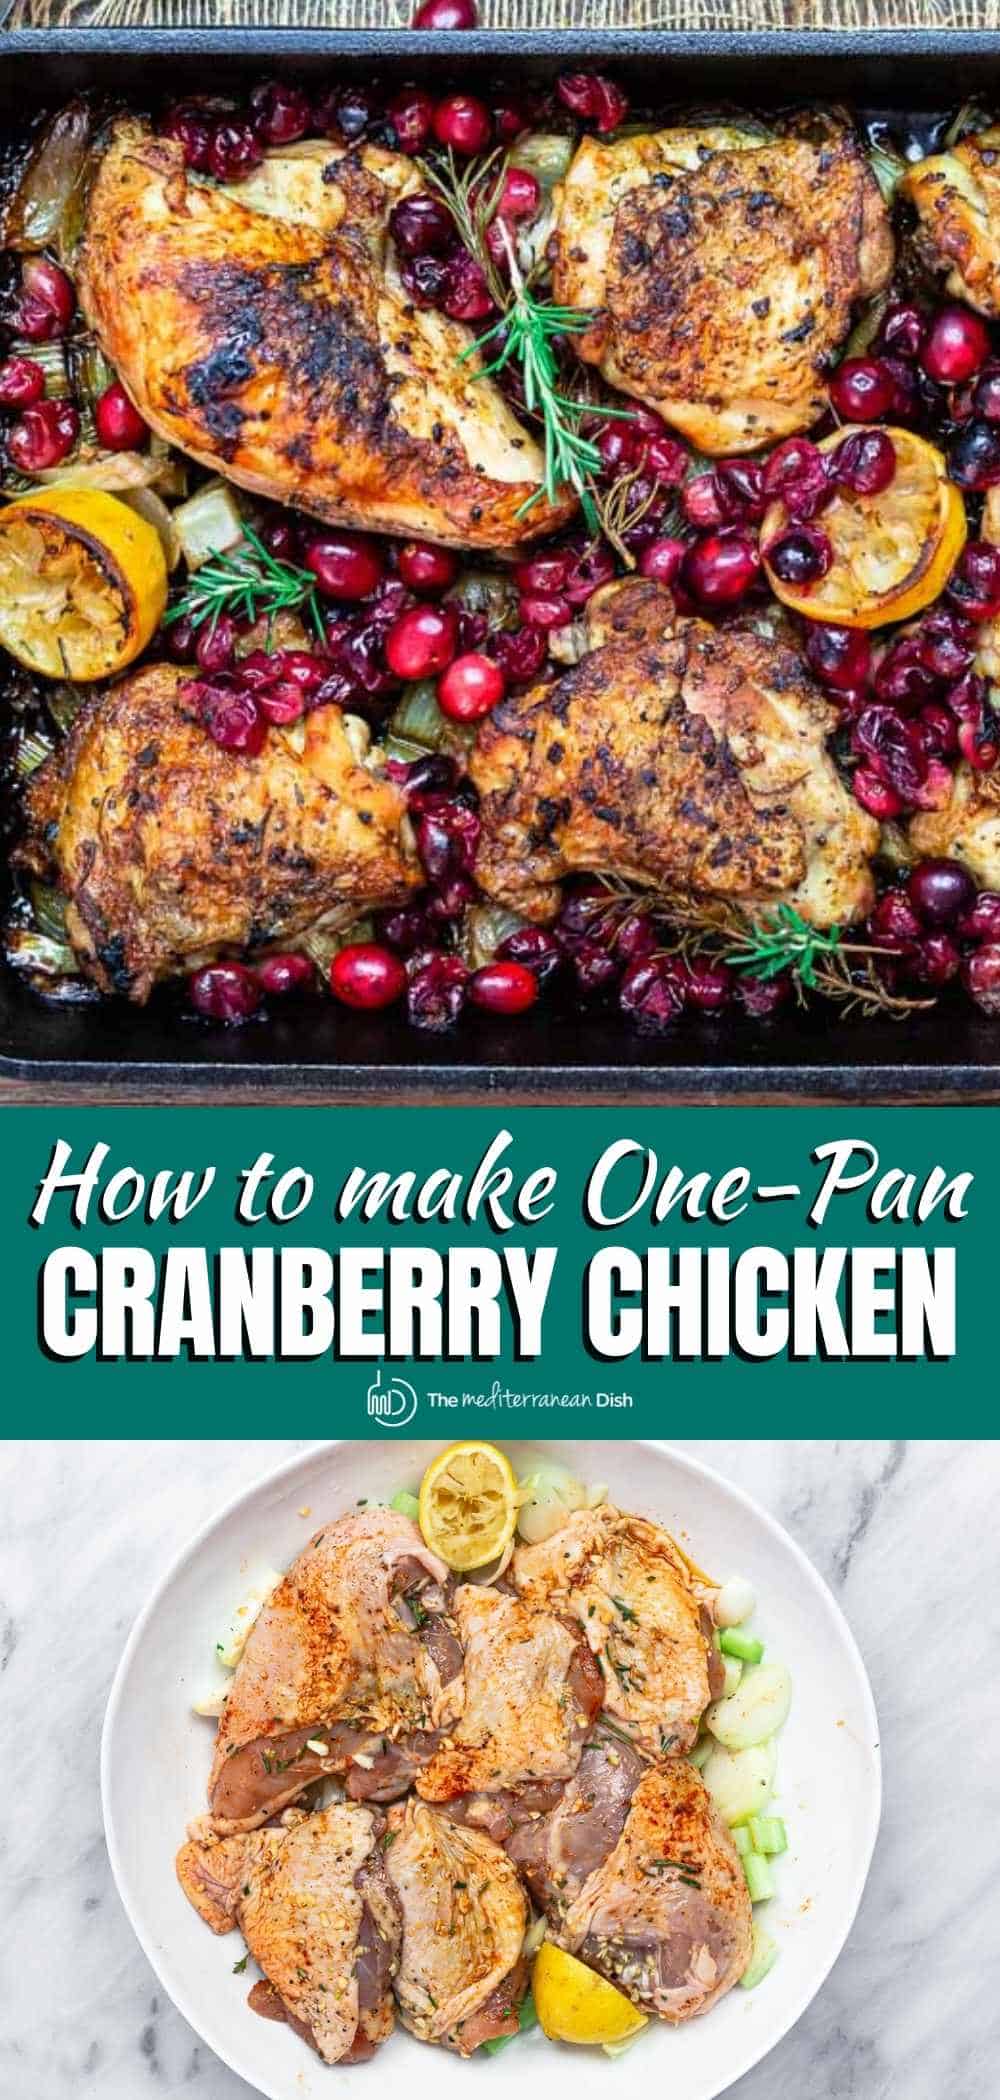 Baked Cranberry Chicken Recipe with Rosemary | The Mediterranean Dish